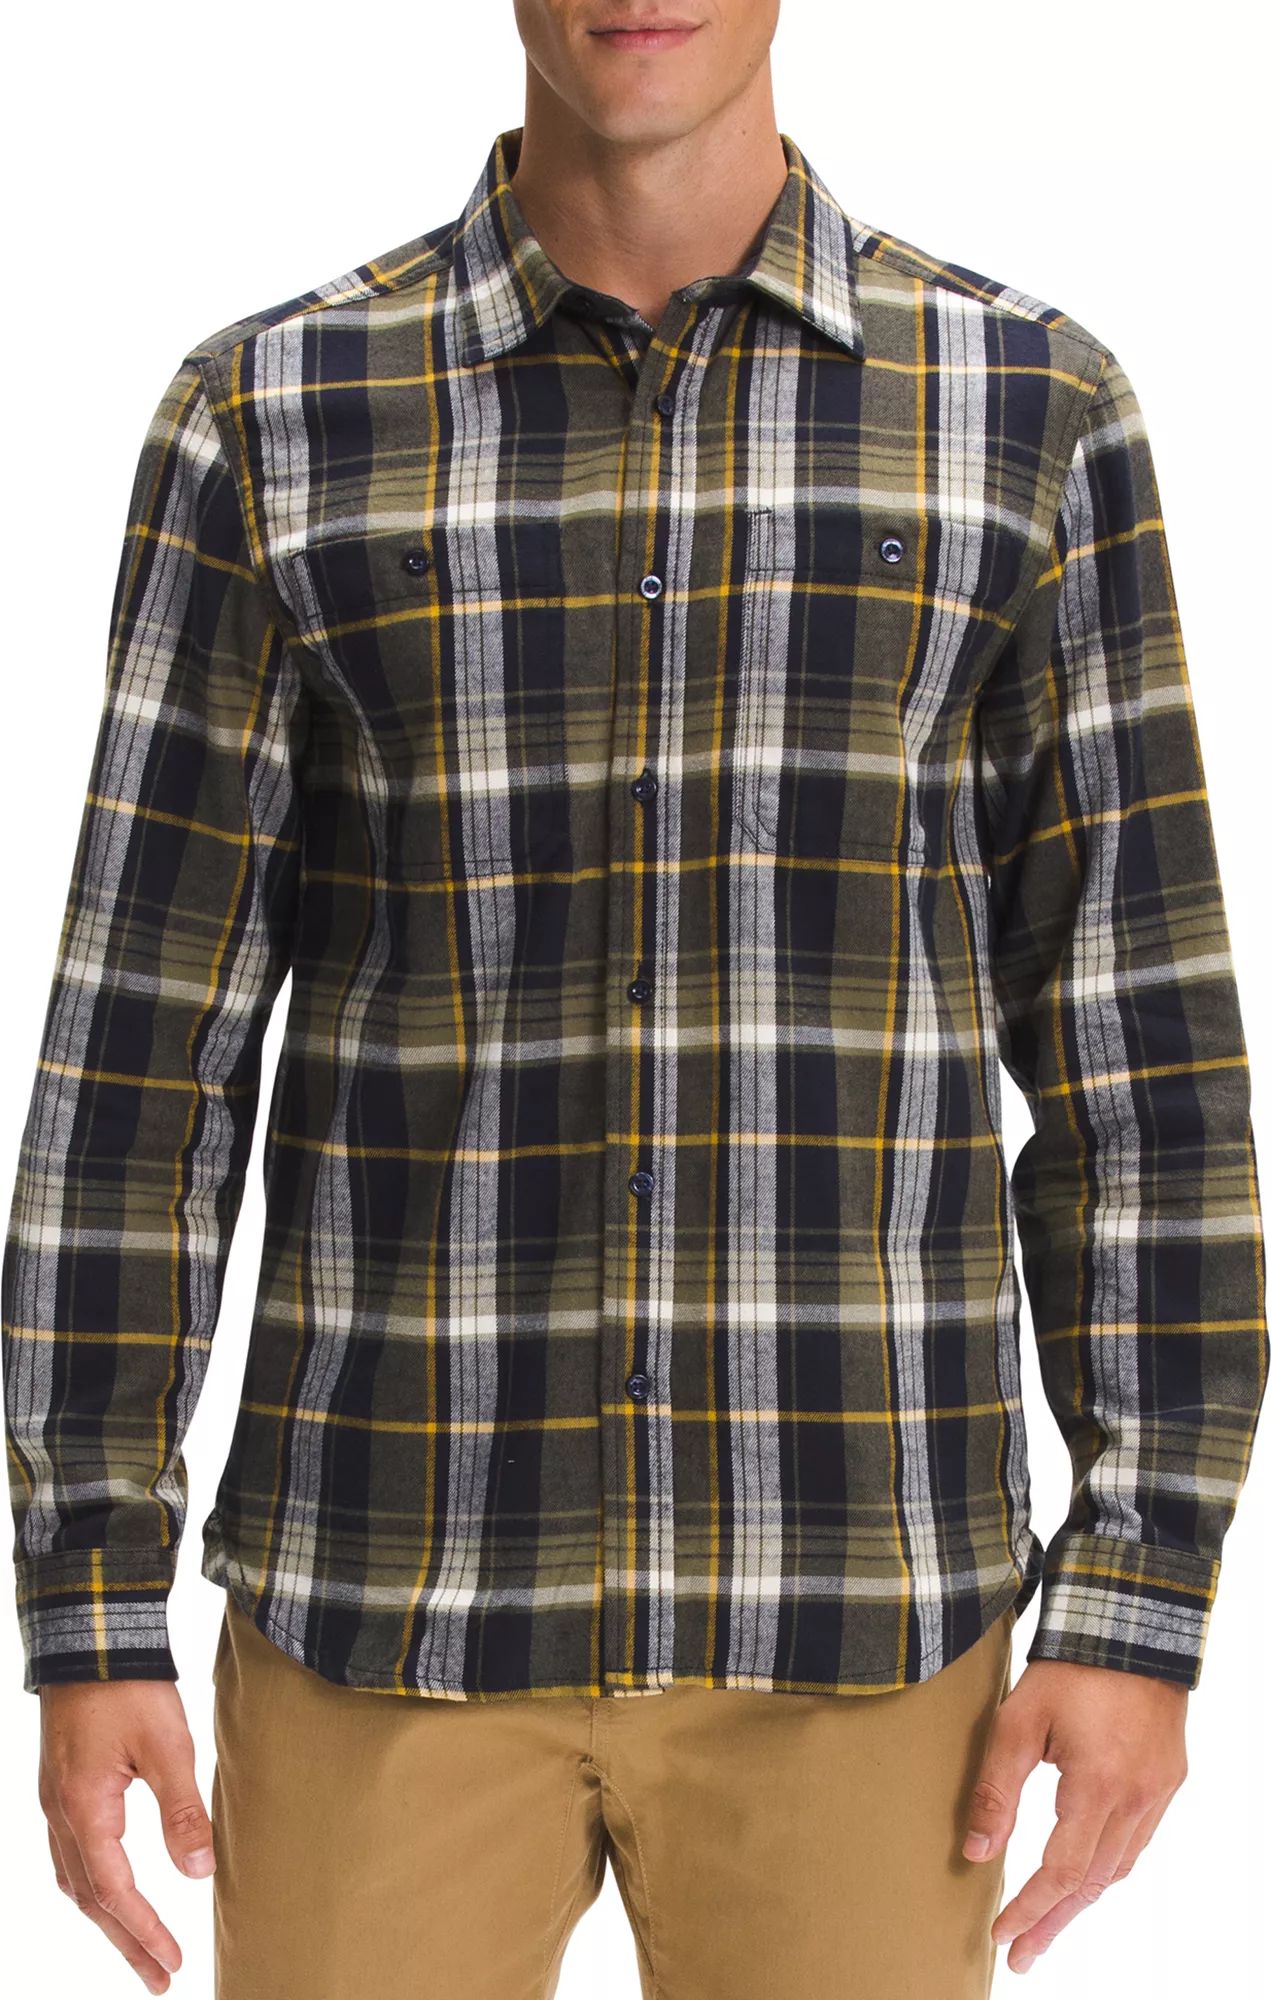 The North Face Men's Arroyo Lightweight Flannel Shirt, Small, Brnt OlvGrn Md HlfDme Pld | Dick's Sporting Goods